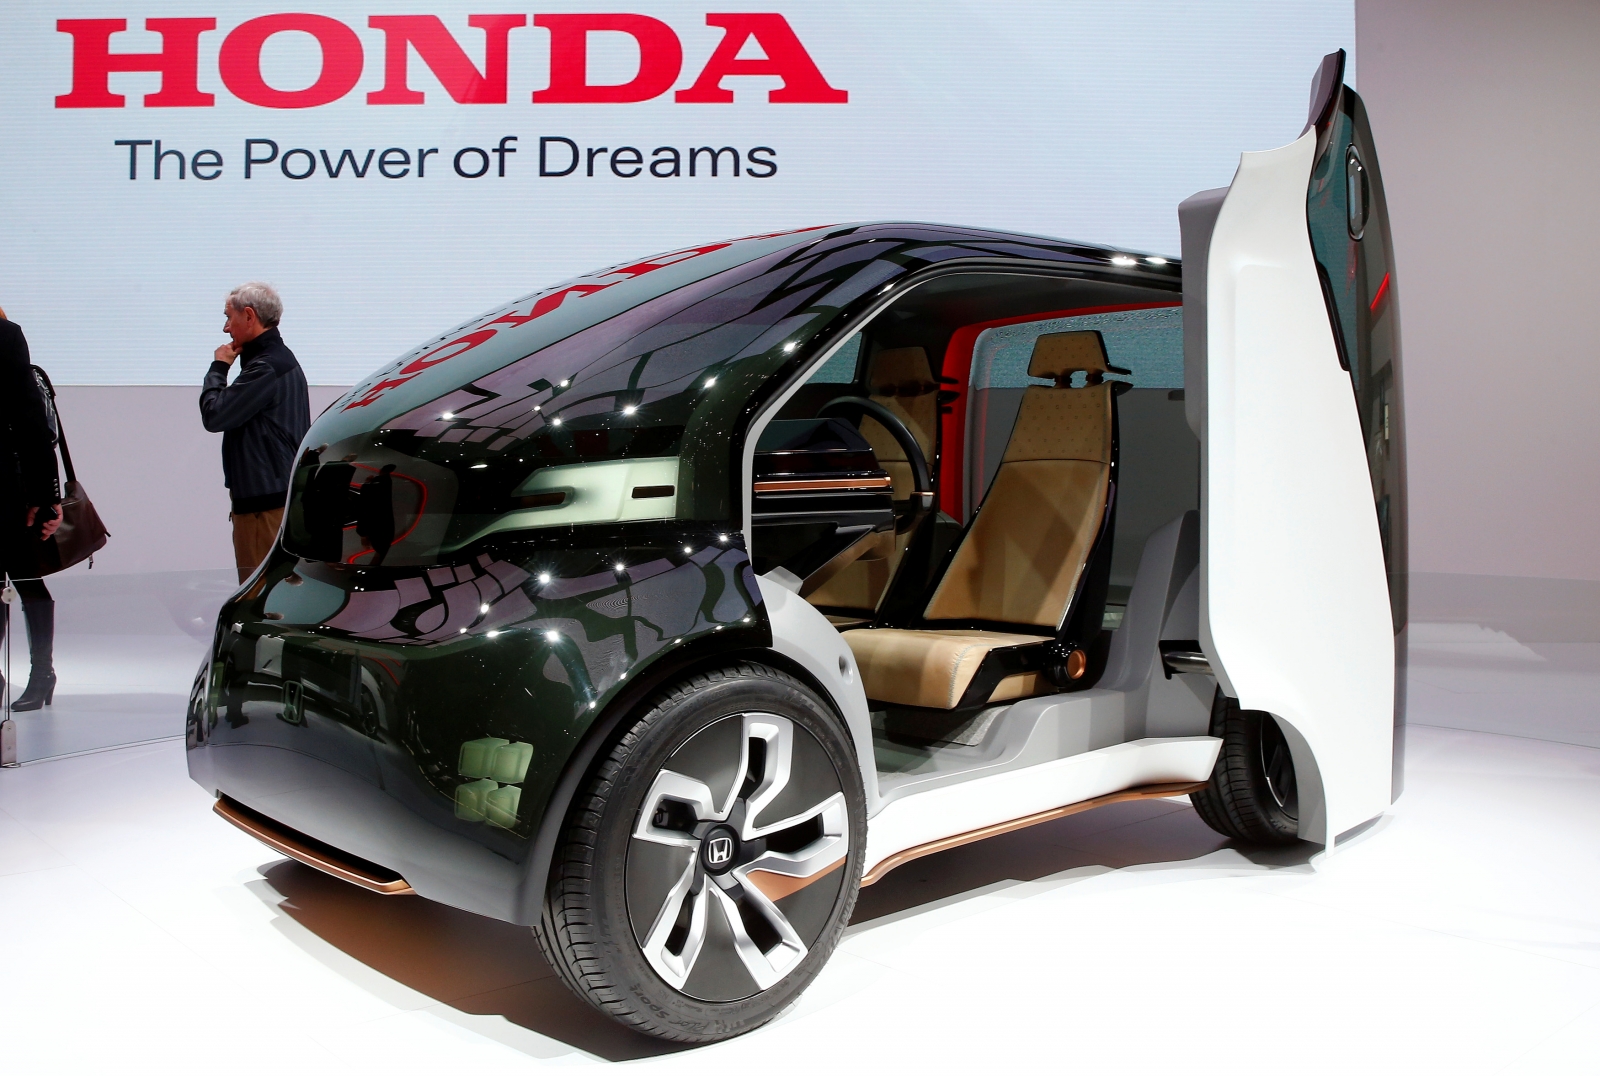 Honda on self-driving, AI and the future of the supercar